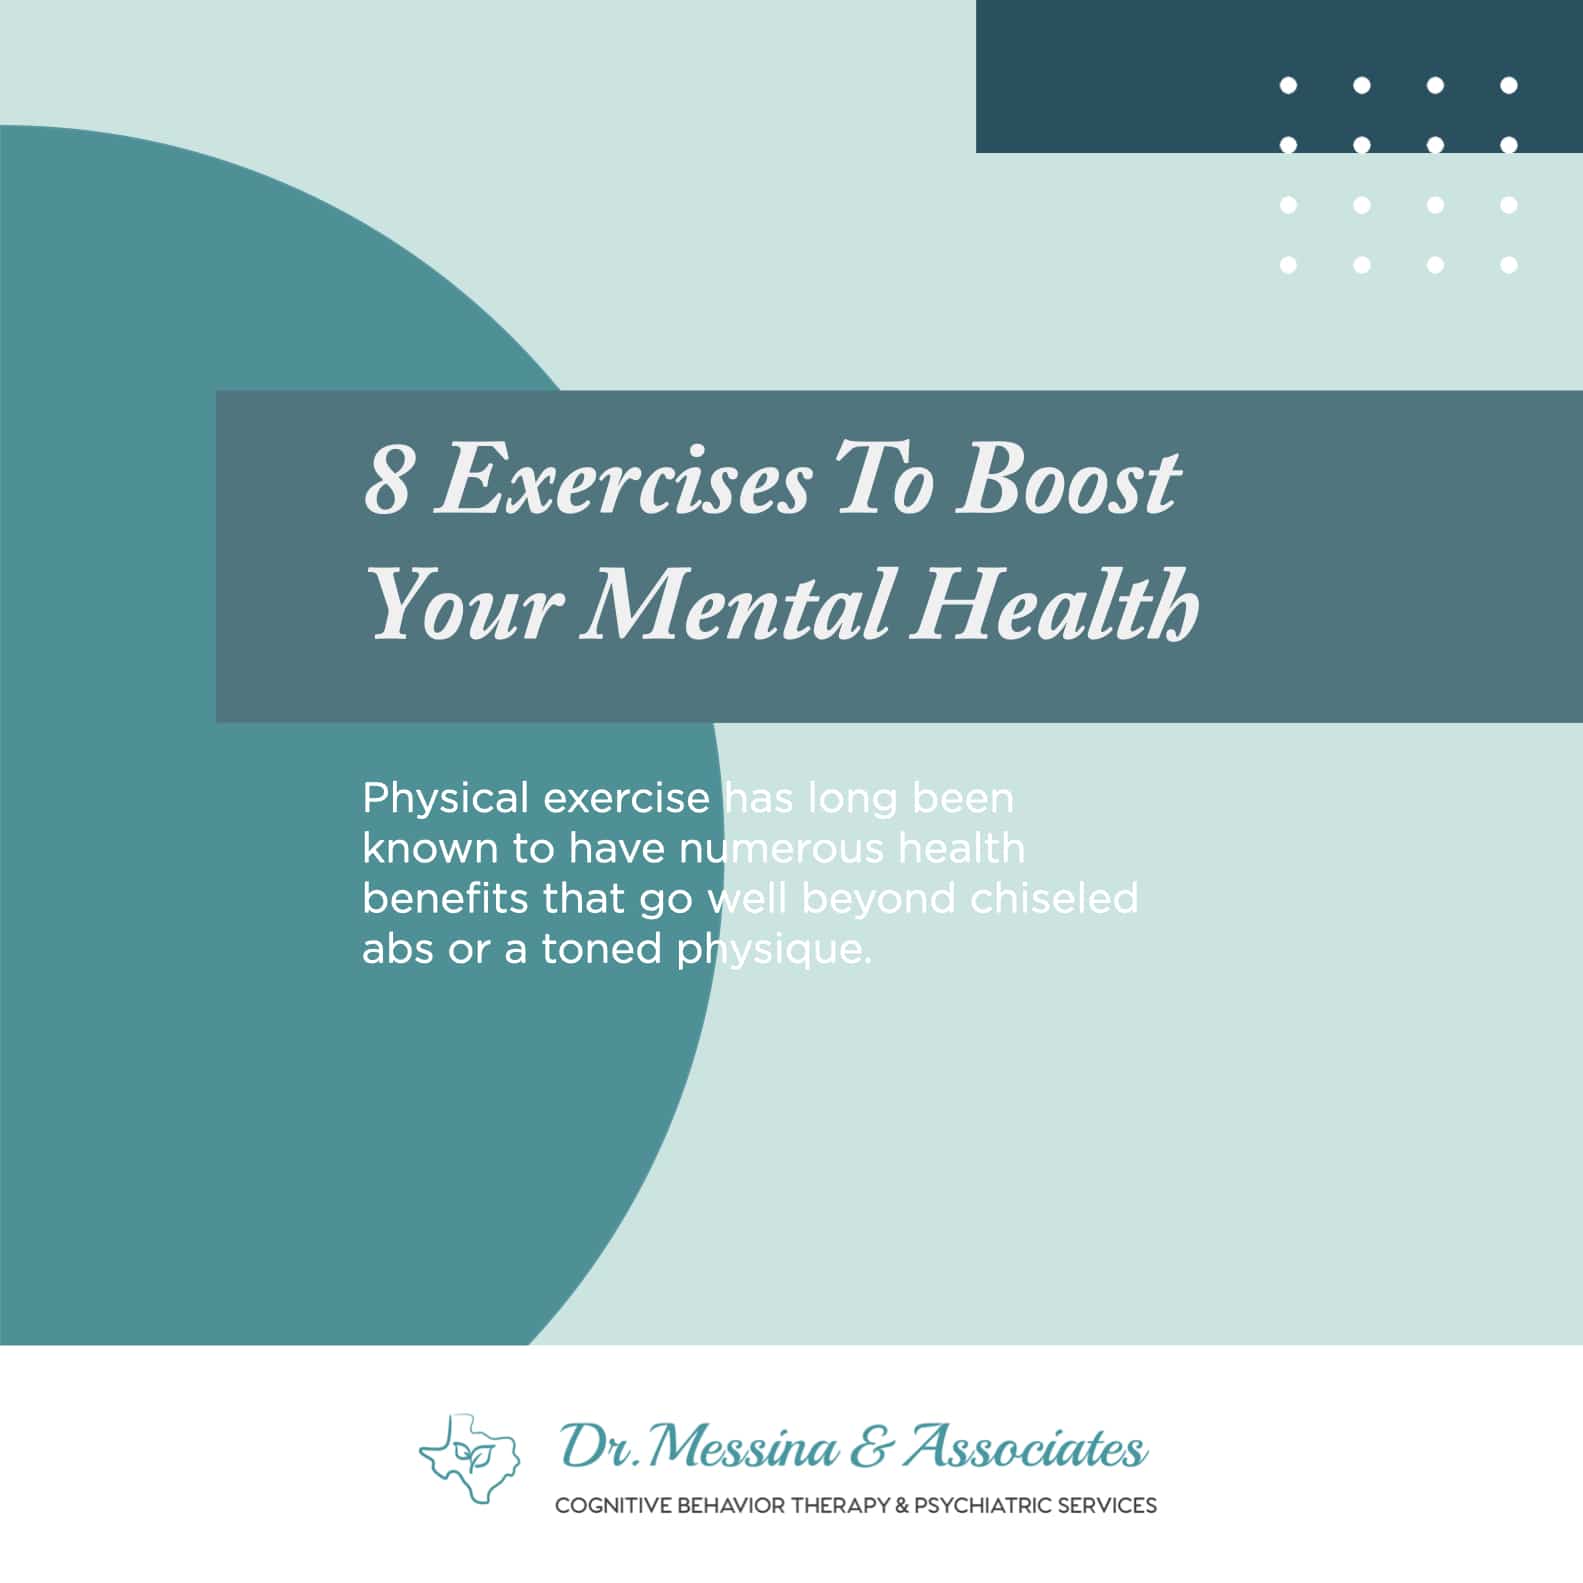 8 exercises to boost your mental health significantly.